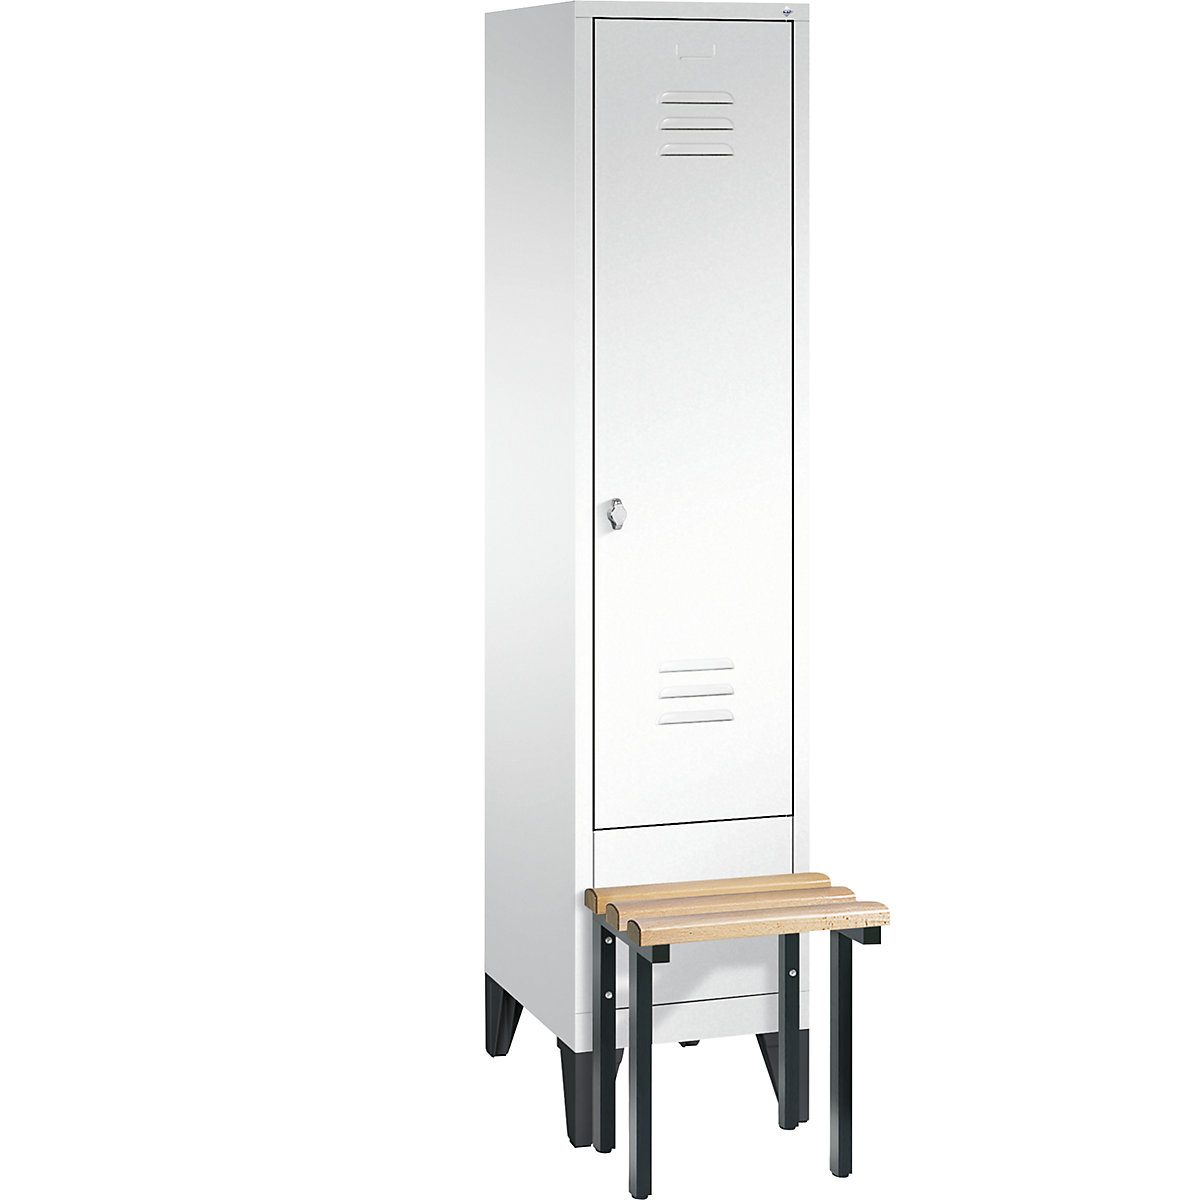 CLASSIC cloakroom locker with bench mounted in front – C+P, 1 compartment, compartment width 400 mm, traffic white-14